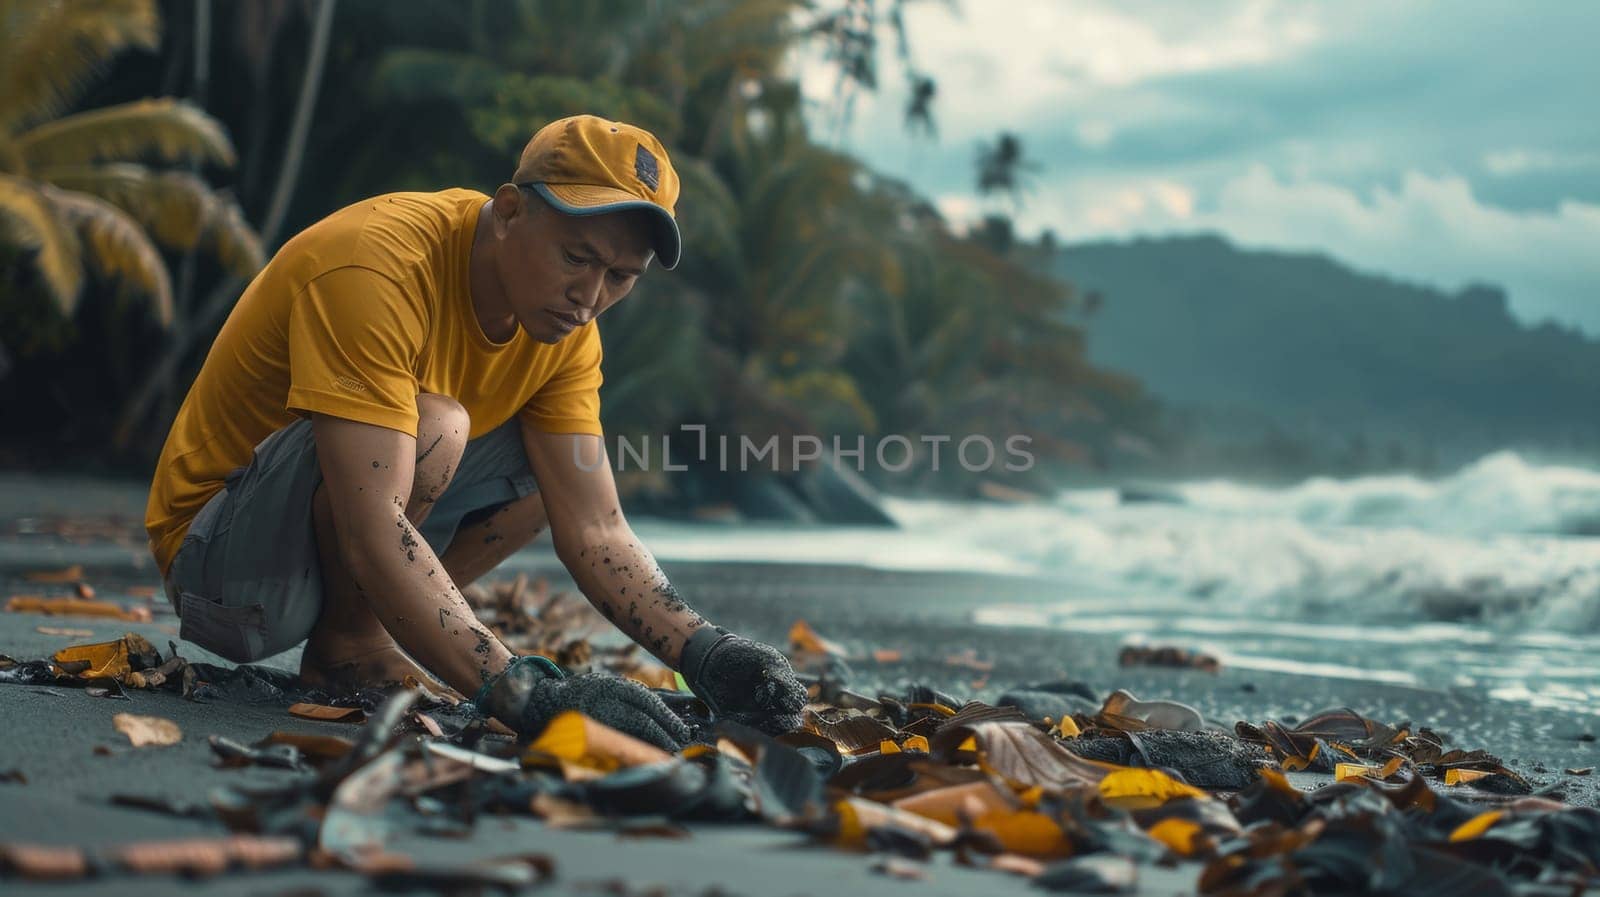 A man kneeling on the beach picking up trash from a pile, AI by starush